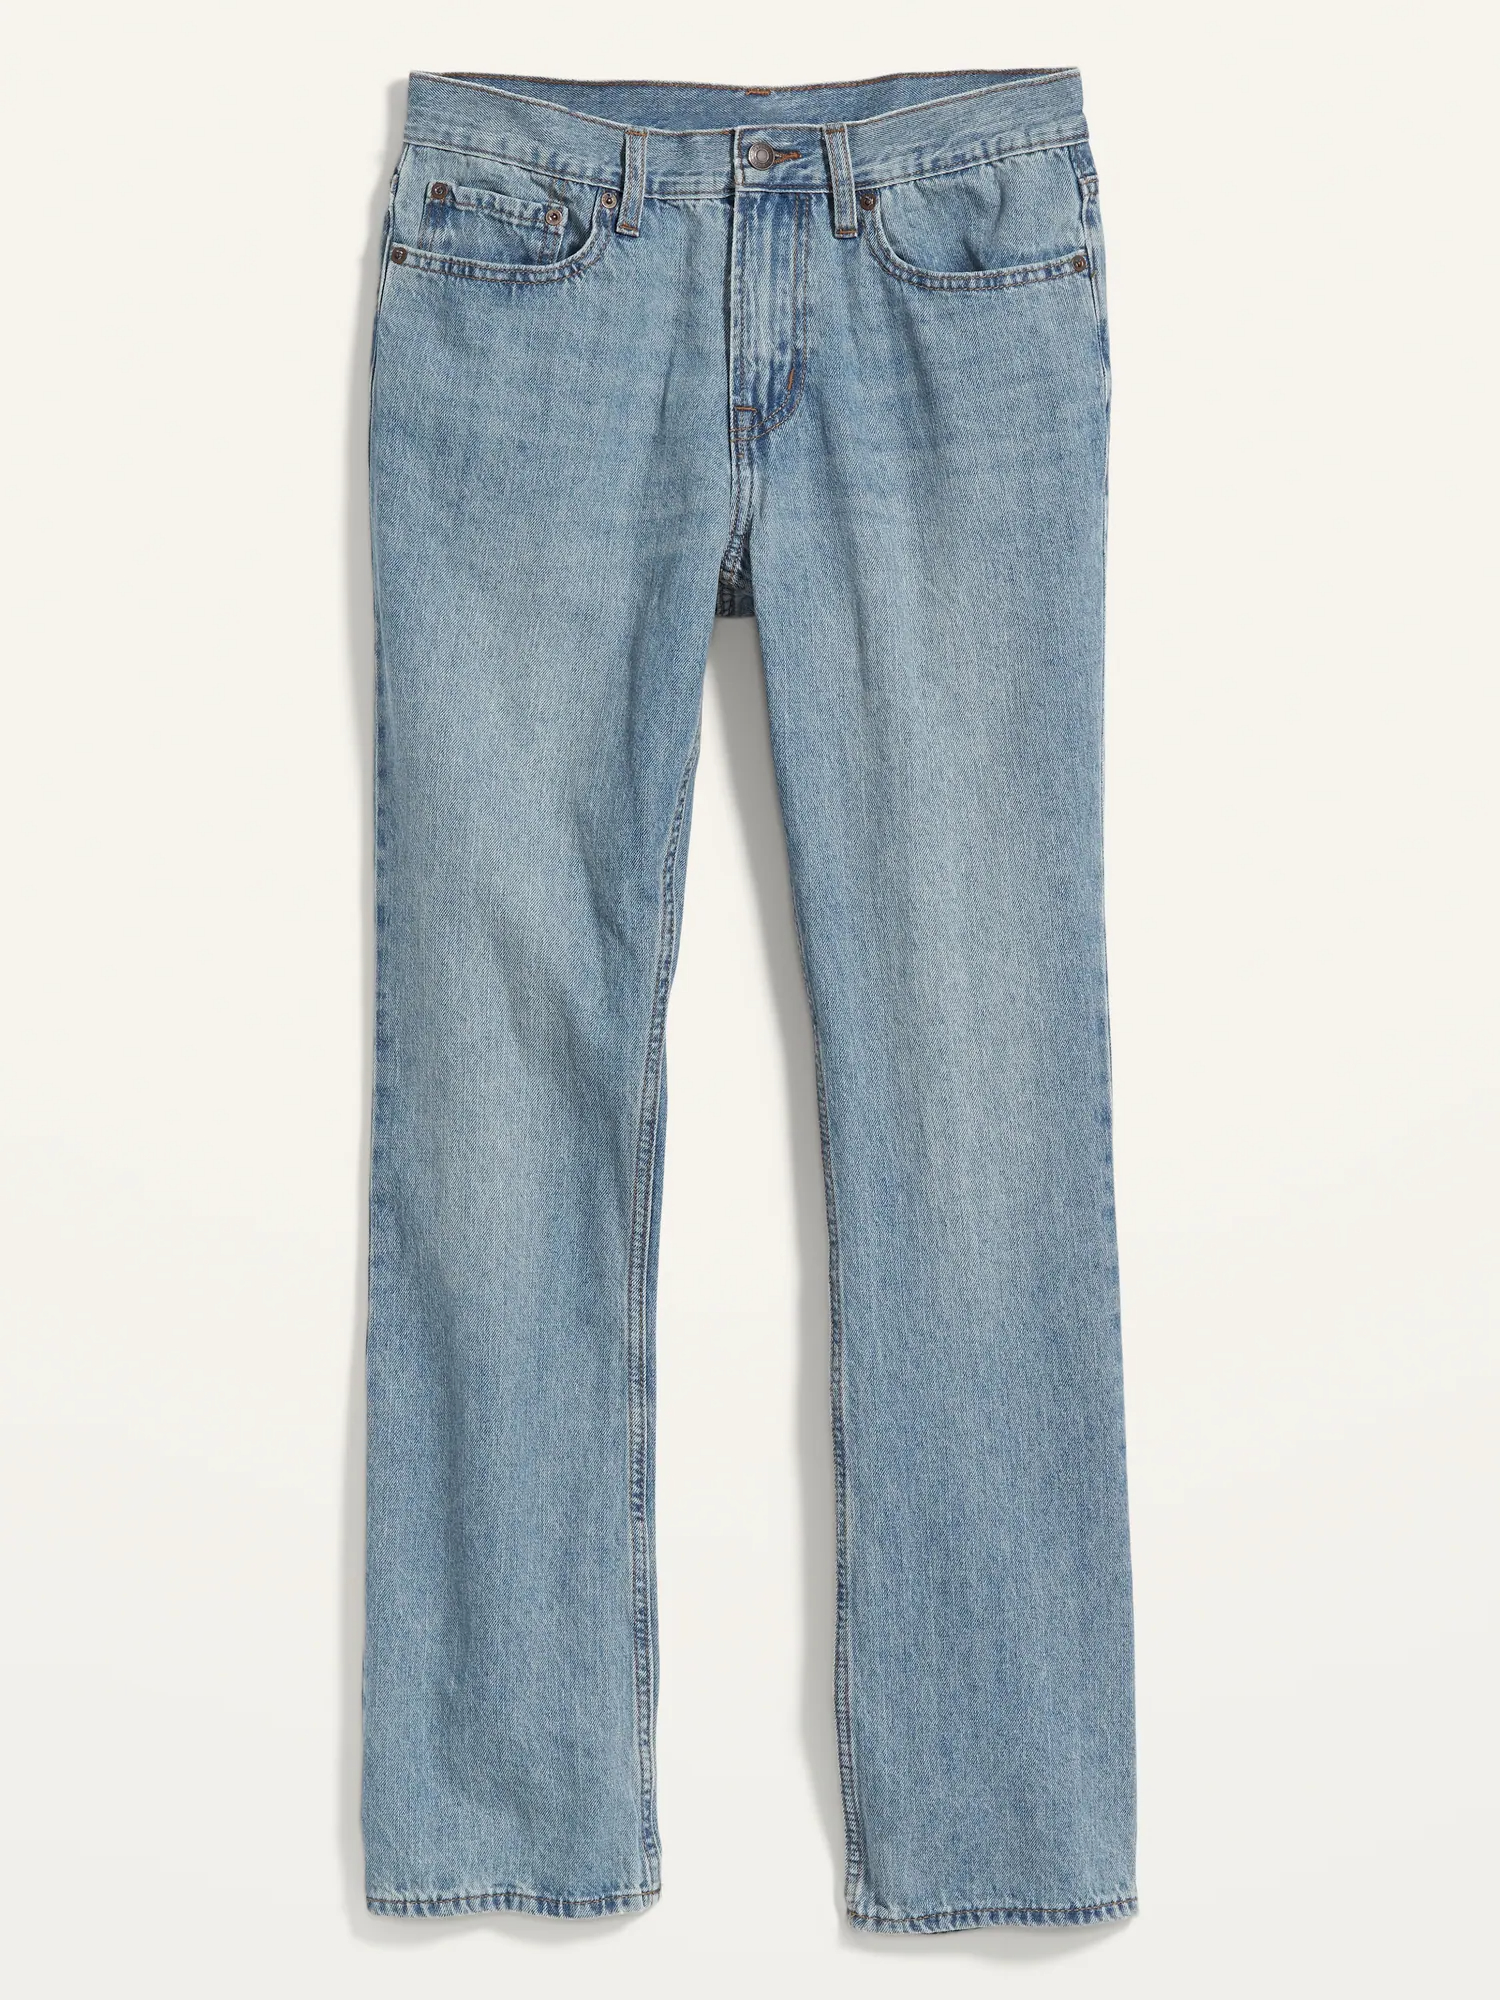 old navy boot cut jeans